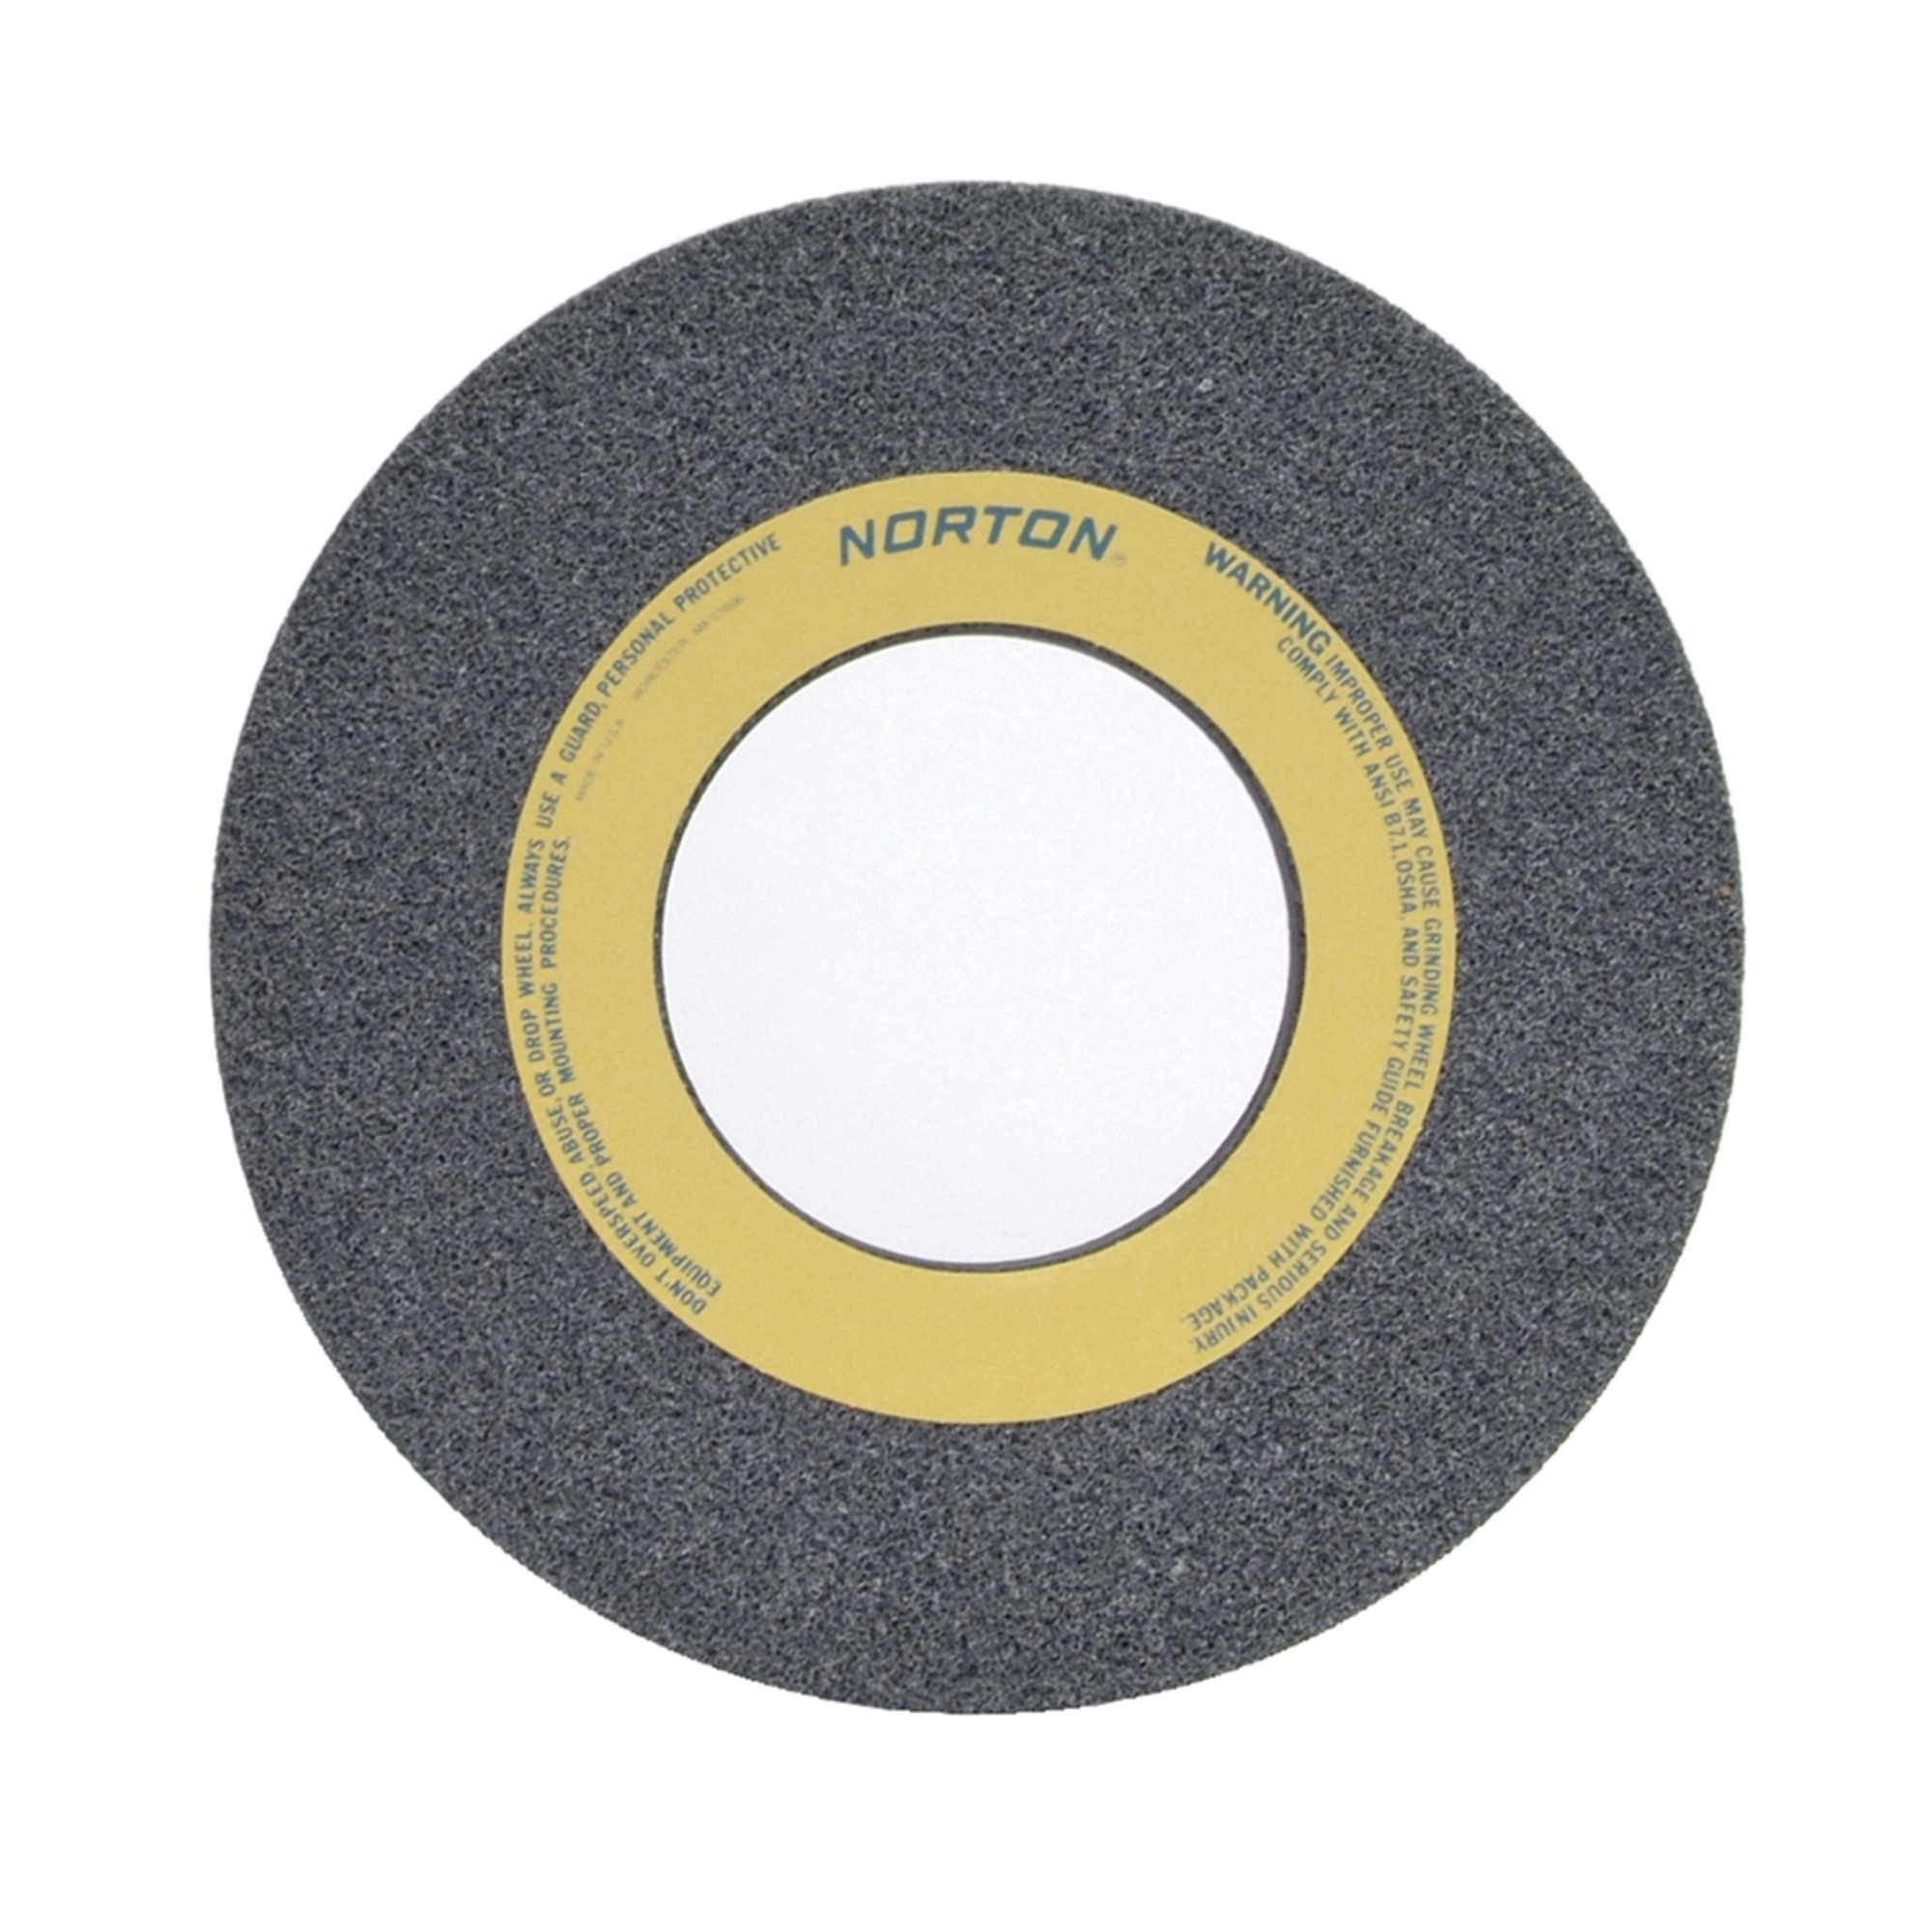 Norton® 66253207707 32AA Straight Toolroom Wheel, 12 in Dia x 1-1/2 in THK, 5 in Center Hole, 46 Grit, Aluminum Oxide Abrasive